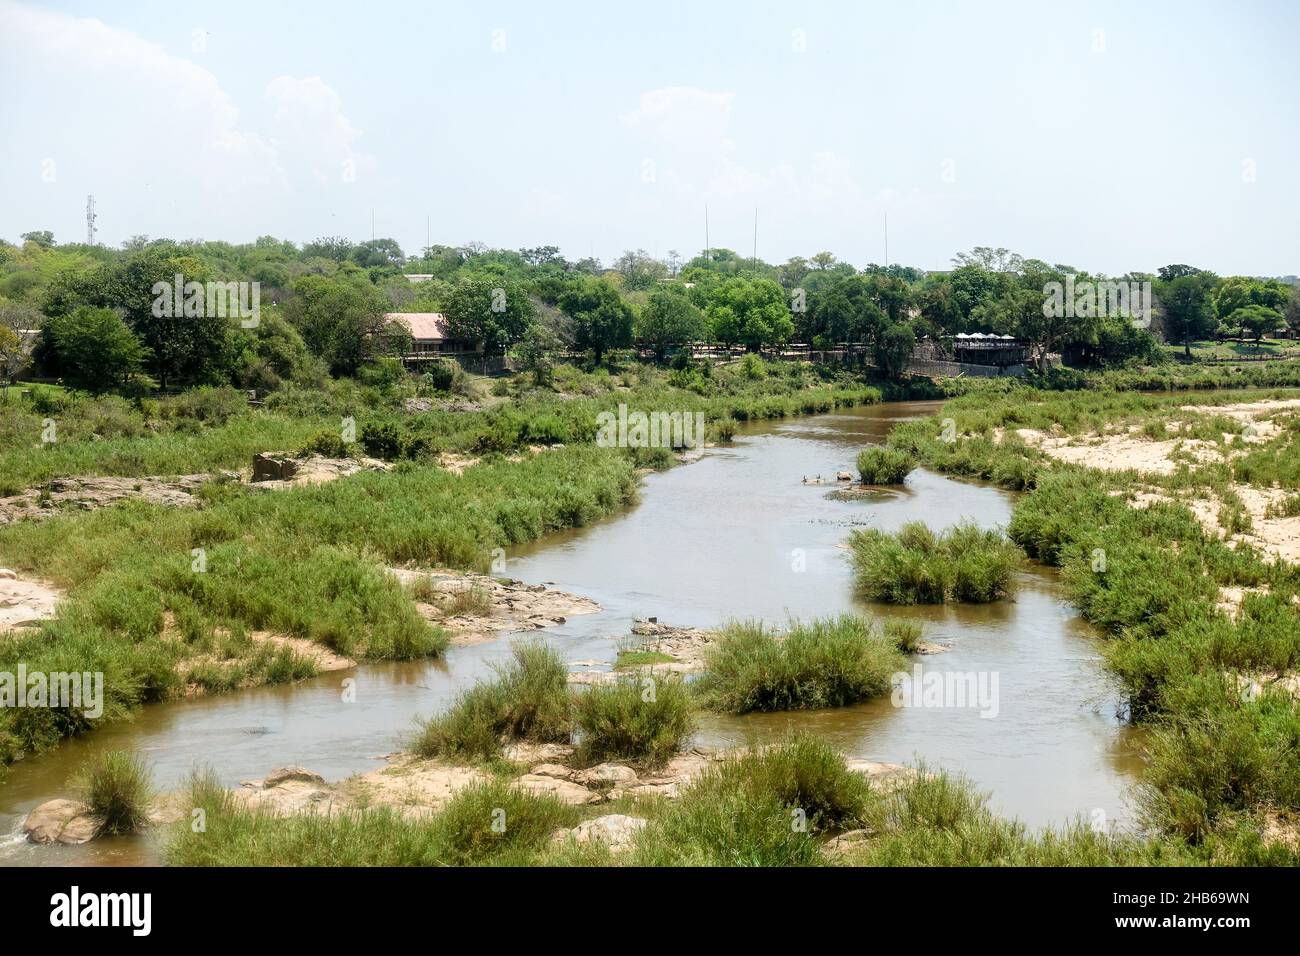 Skukuza river in the Kruger National Park, South Africa Stock Photo